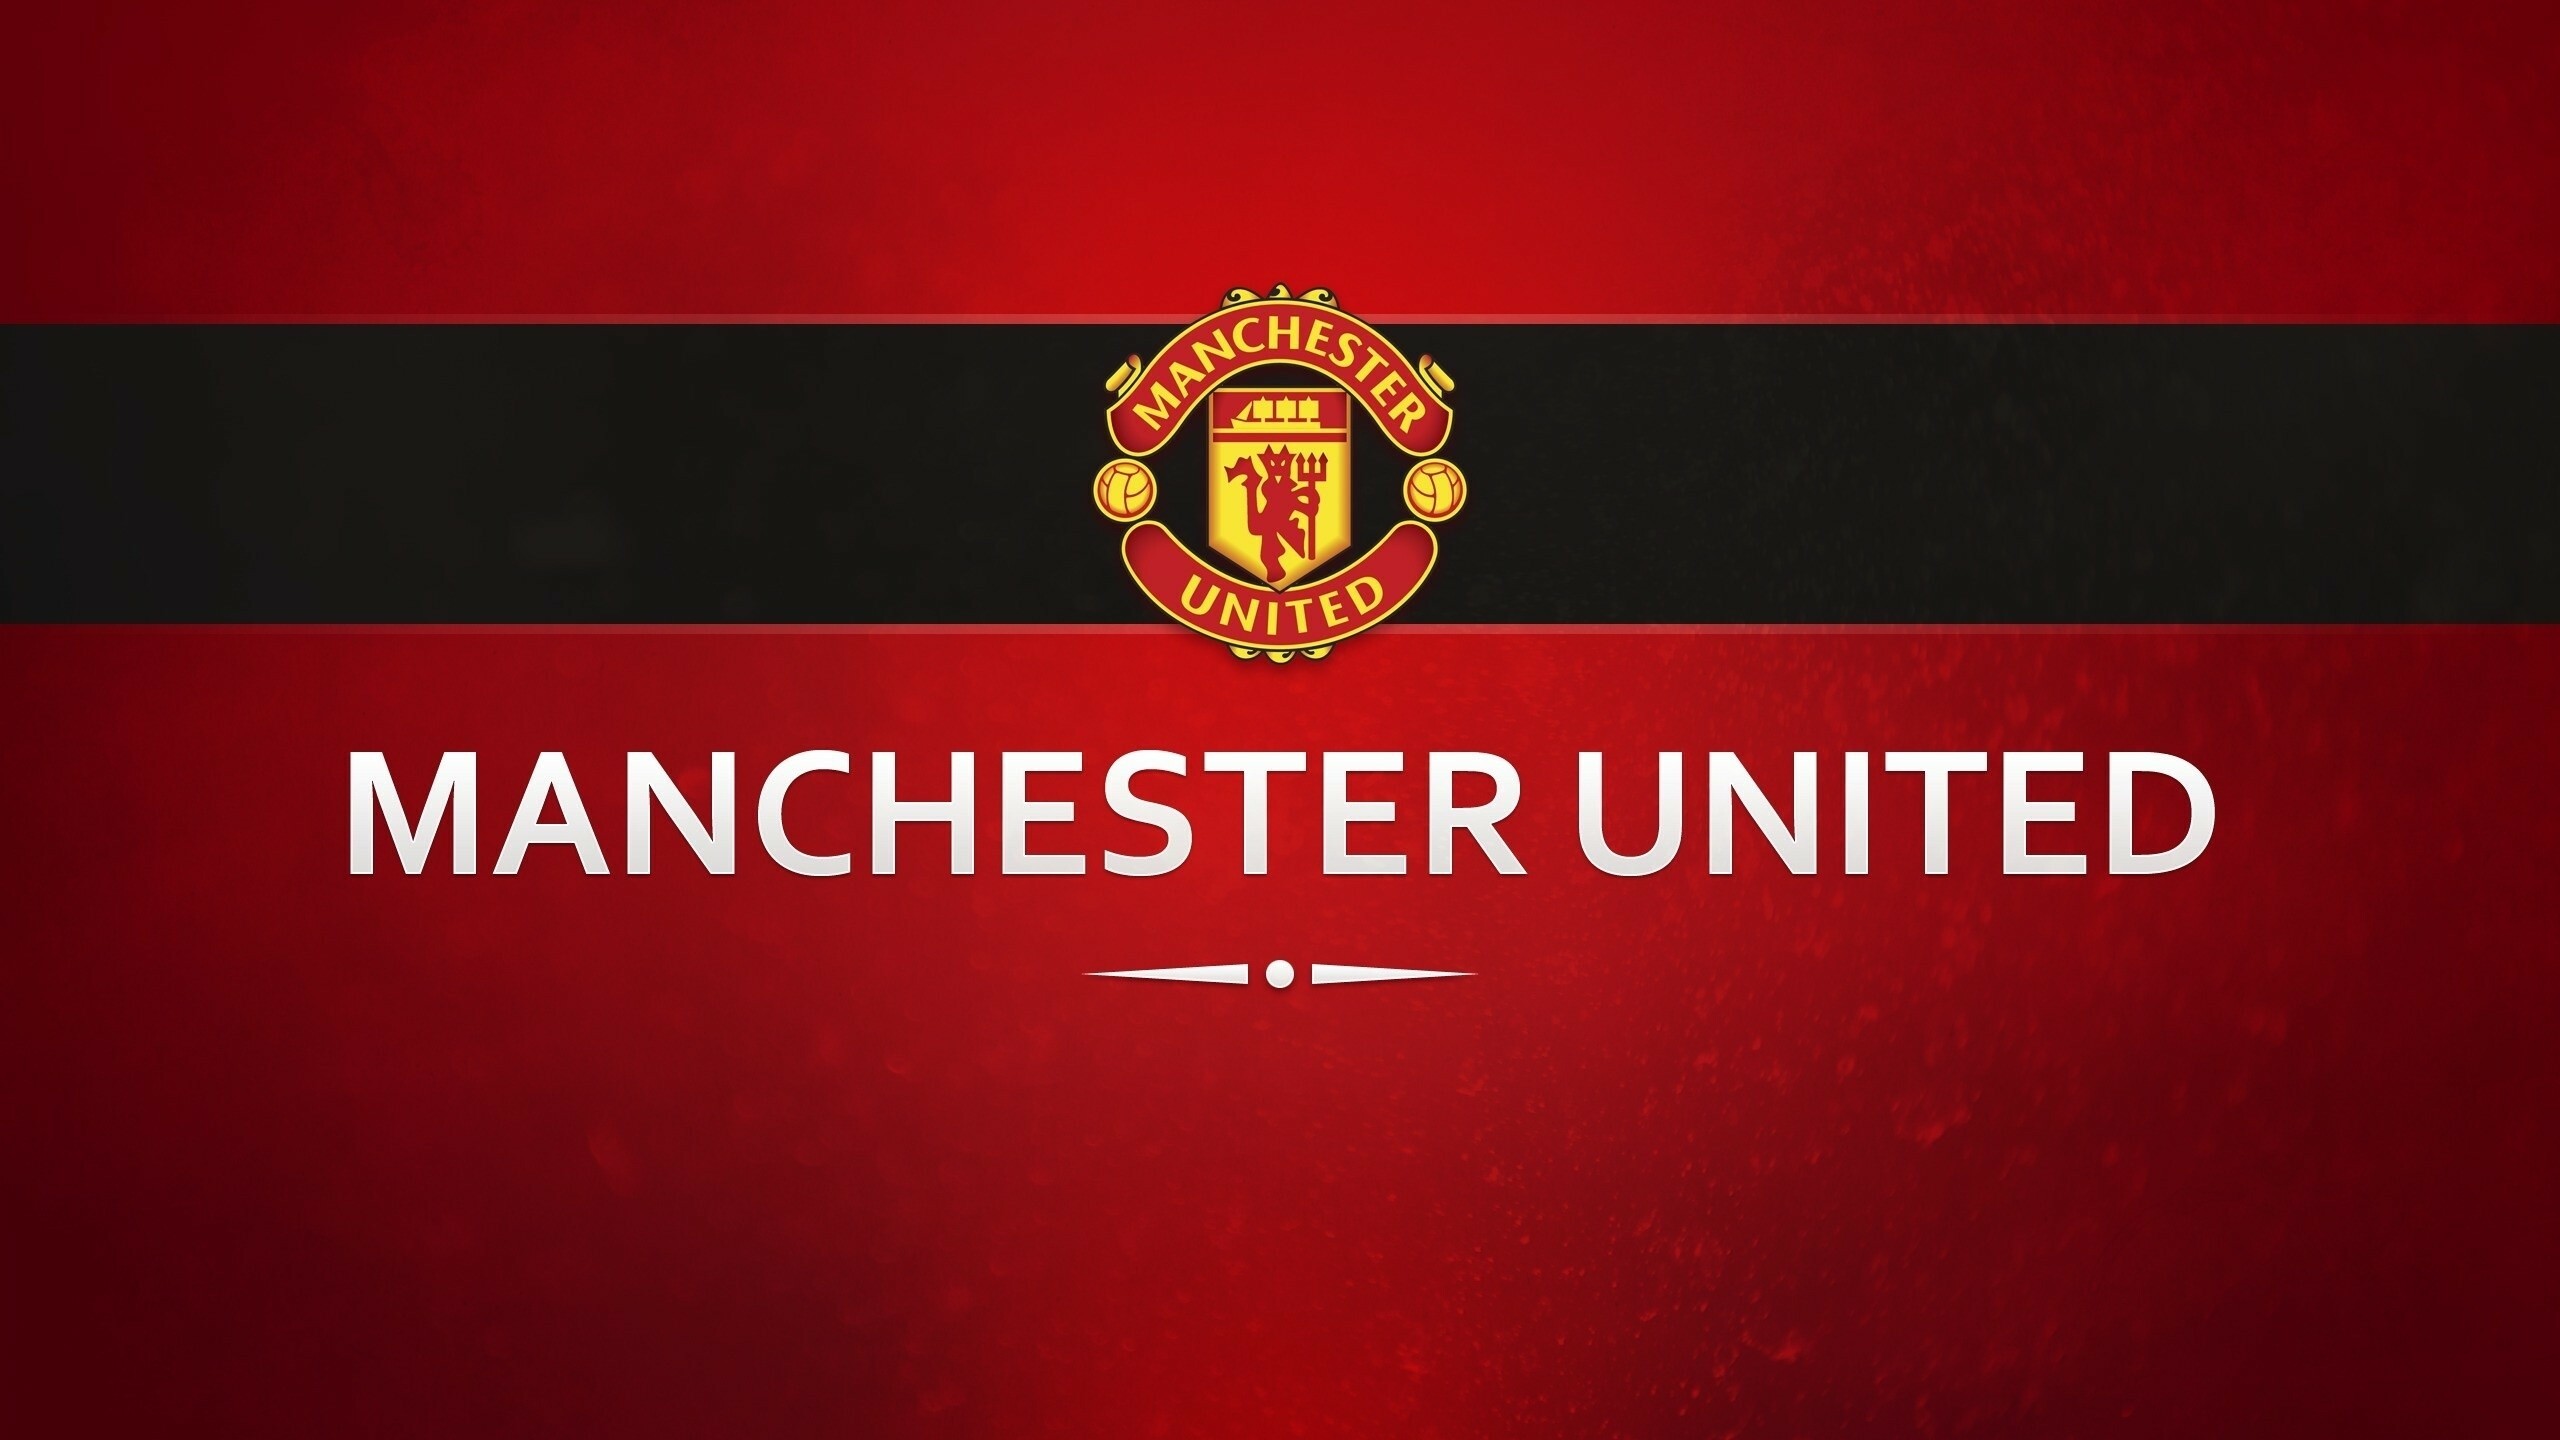 Download Manchester United Logo In 3d Wallpaper | Wallpapers.com